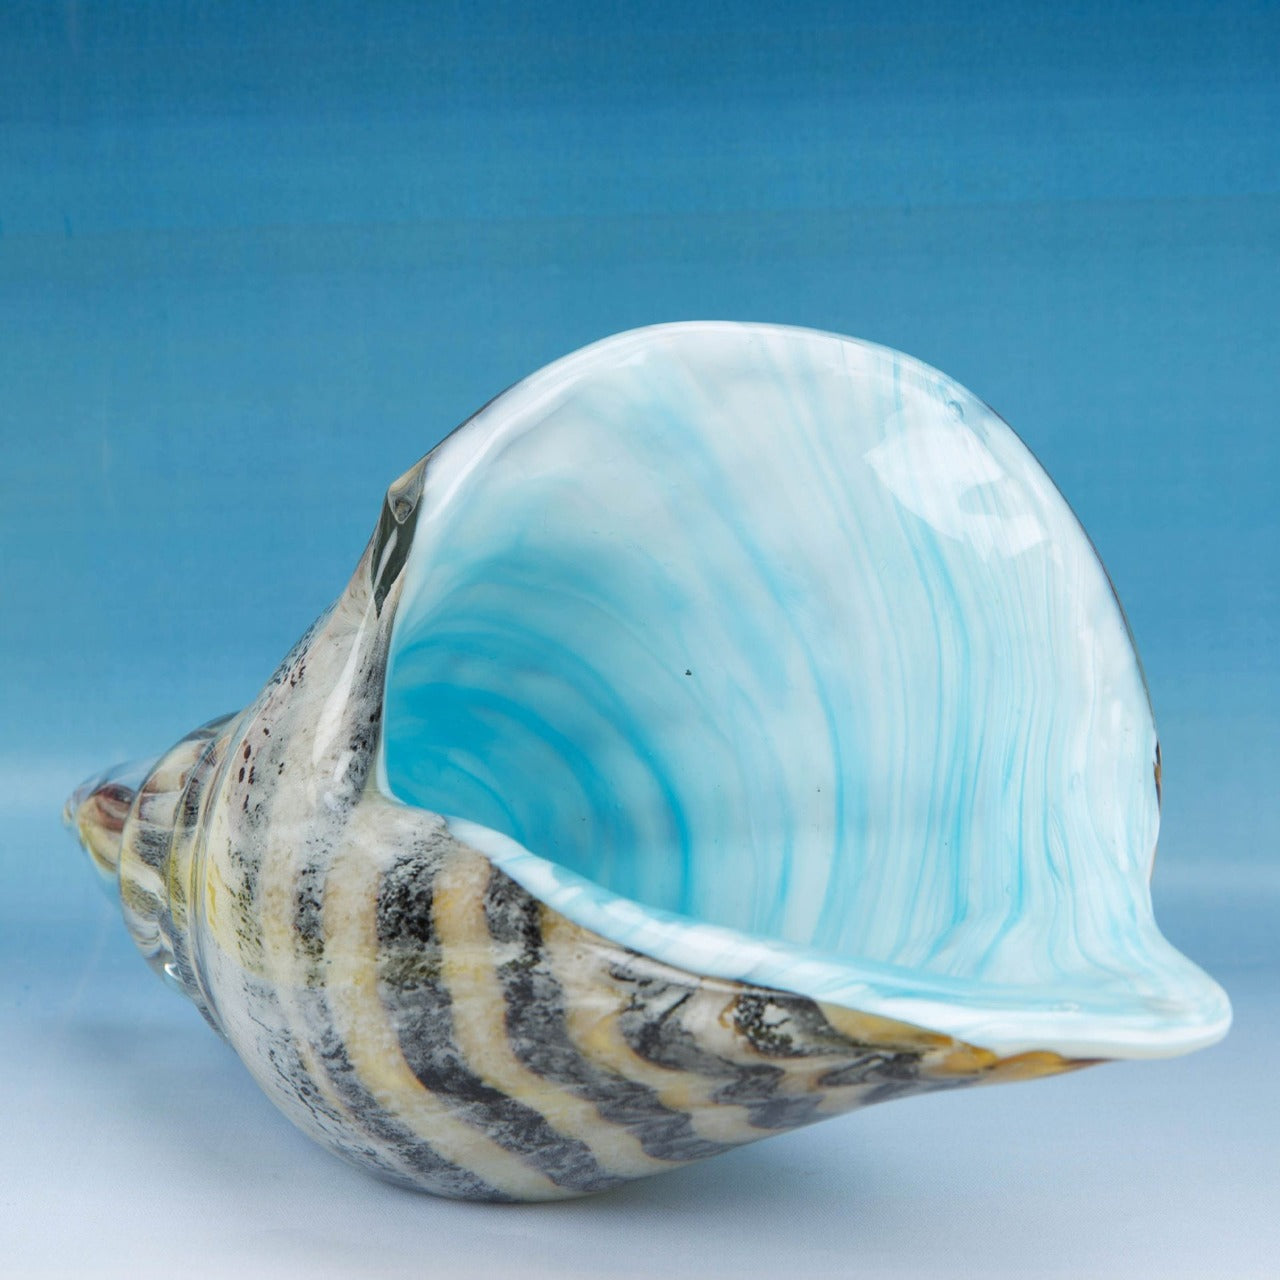 Objets Dart Glass Figurine - Shell  A beautiful, large handmade glass conch shell ornament. From Objets d'Art - hand blown and one hundred percent unique.